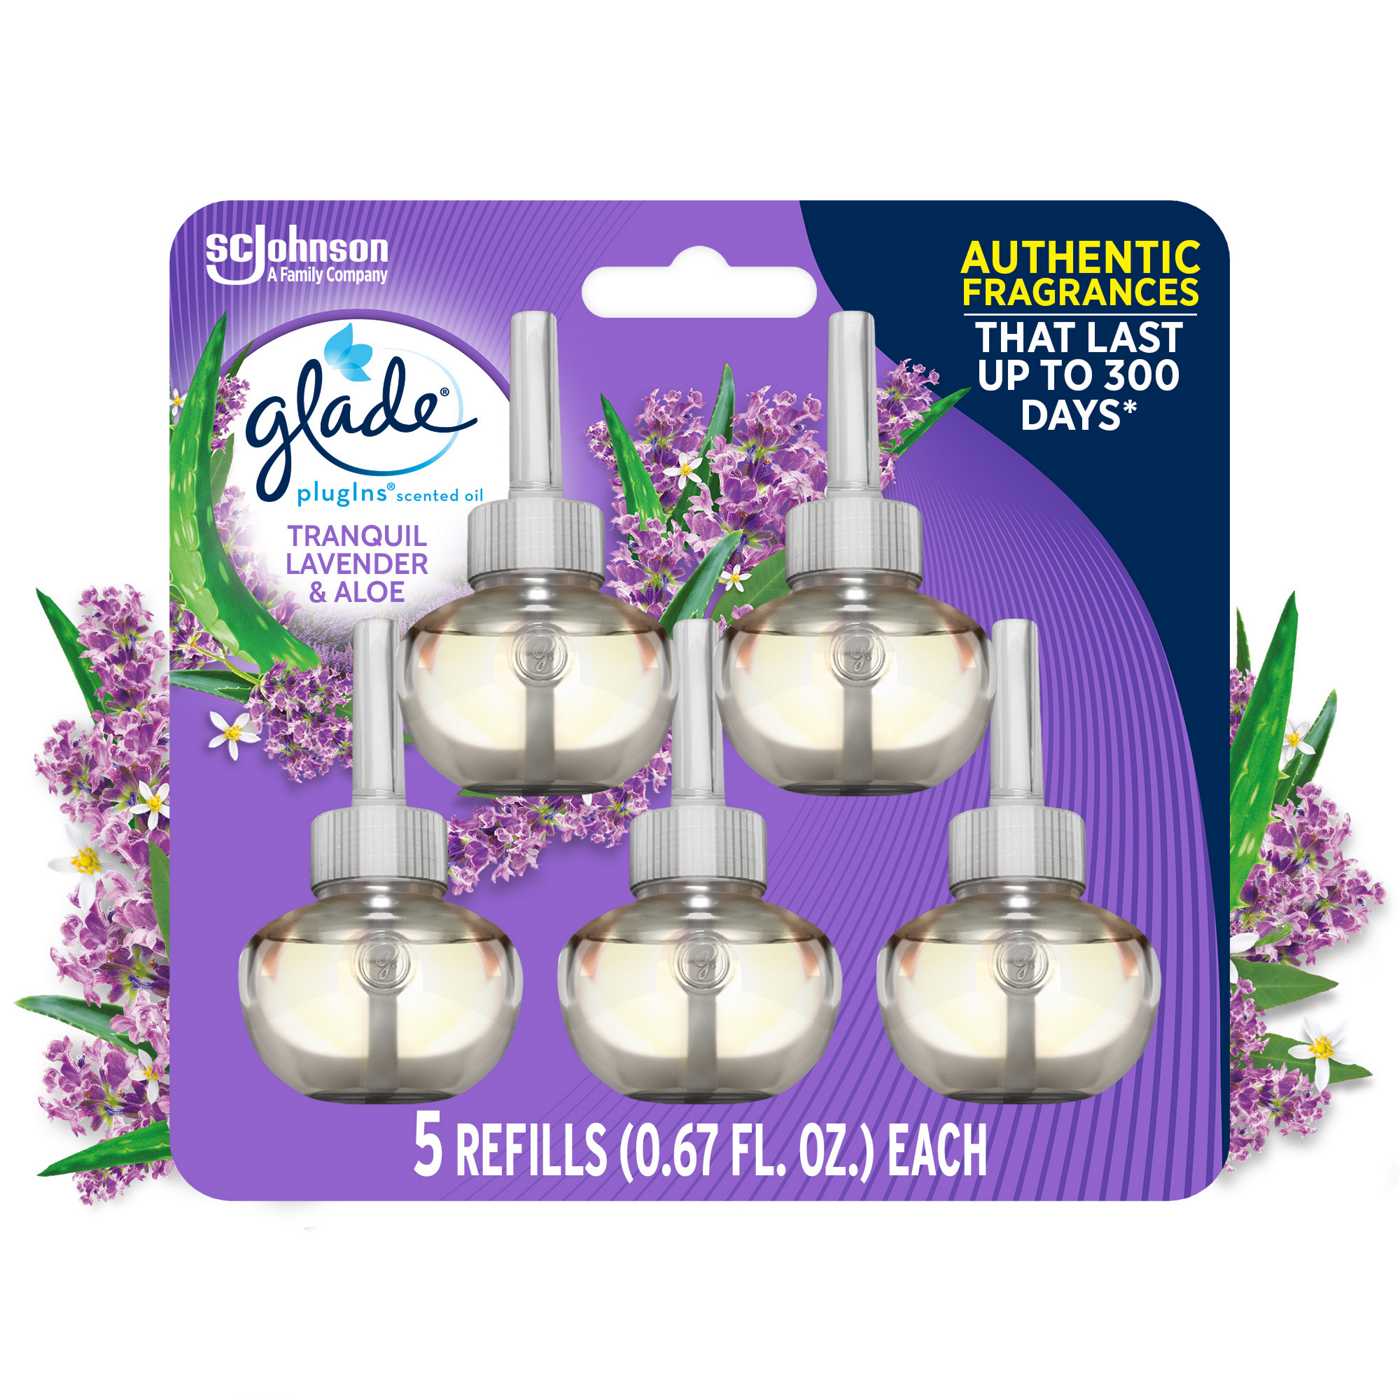 Glade PlugIns Tranquil Lavender & Aloe Scented Oil Refills - Shop Air  Fresheners at H-E-B